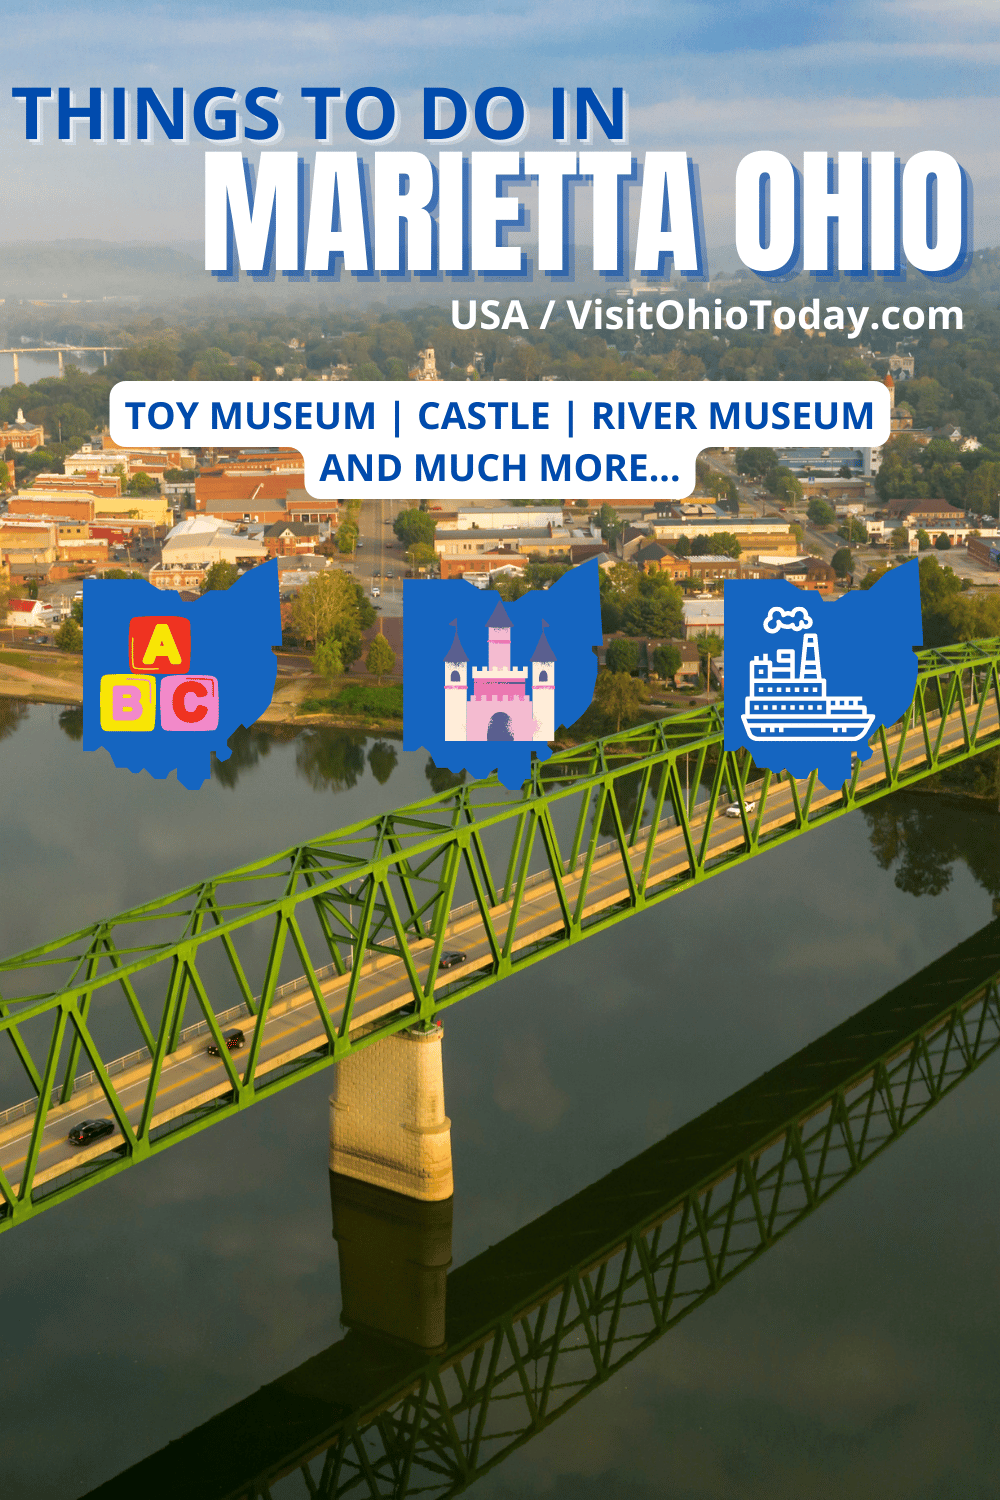 Whether you would like to visit a museum, go for a drink or grab a bite to eat, the small city of Marietta has something for everyone. We can provide tips on things to do in Marietta Ohio! | Things To Do In Marietta Ohio | Washington County | Marietta Ohio